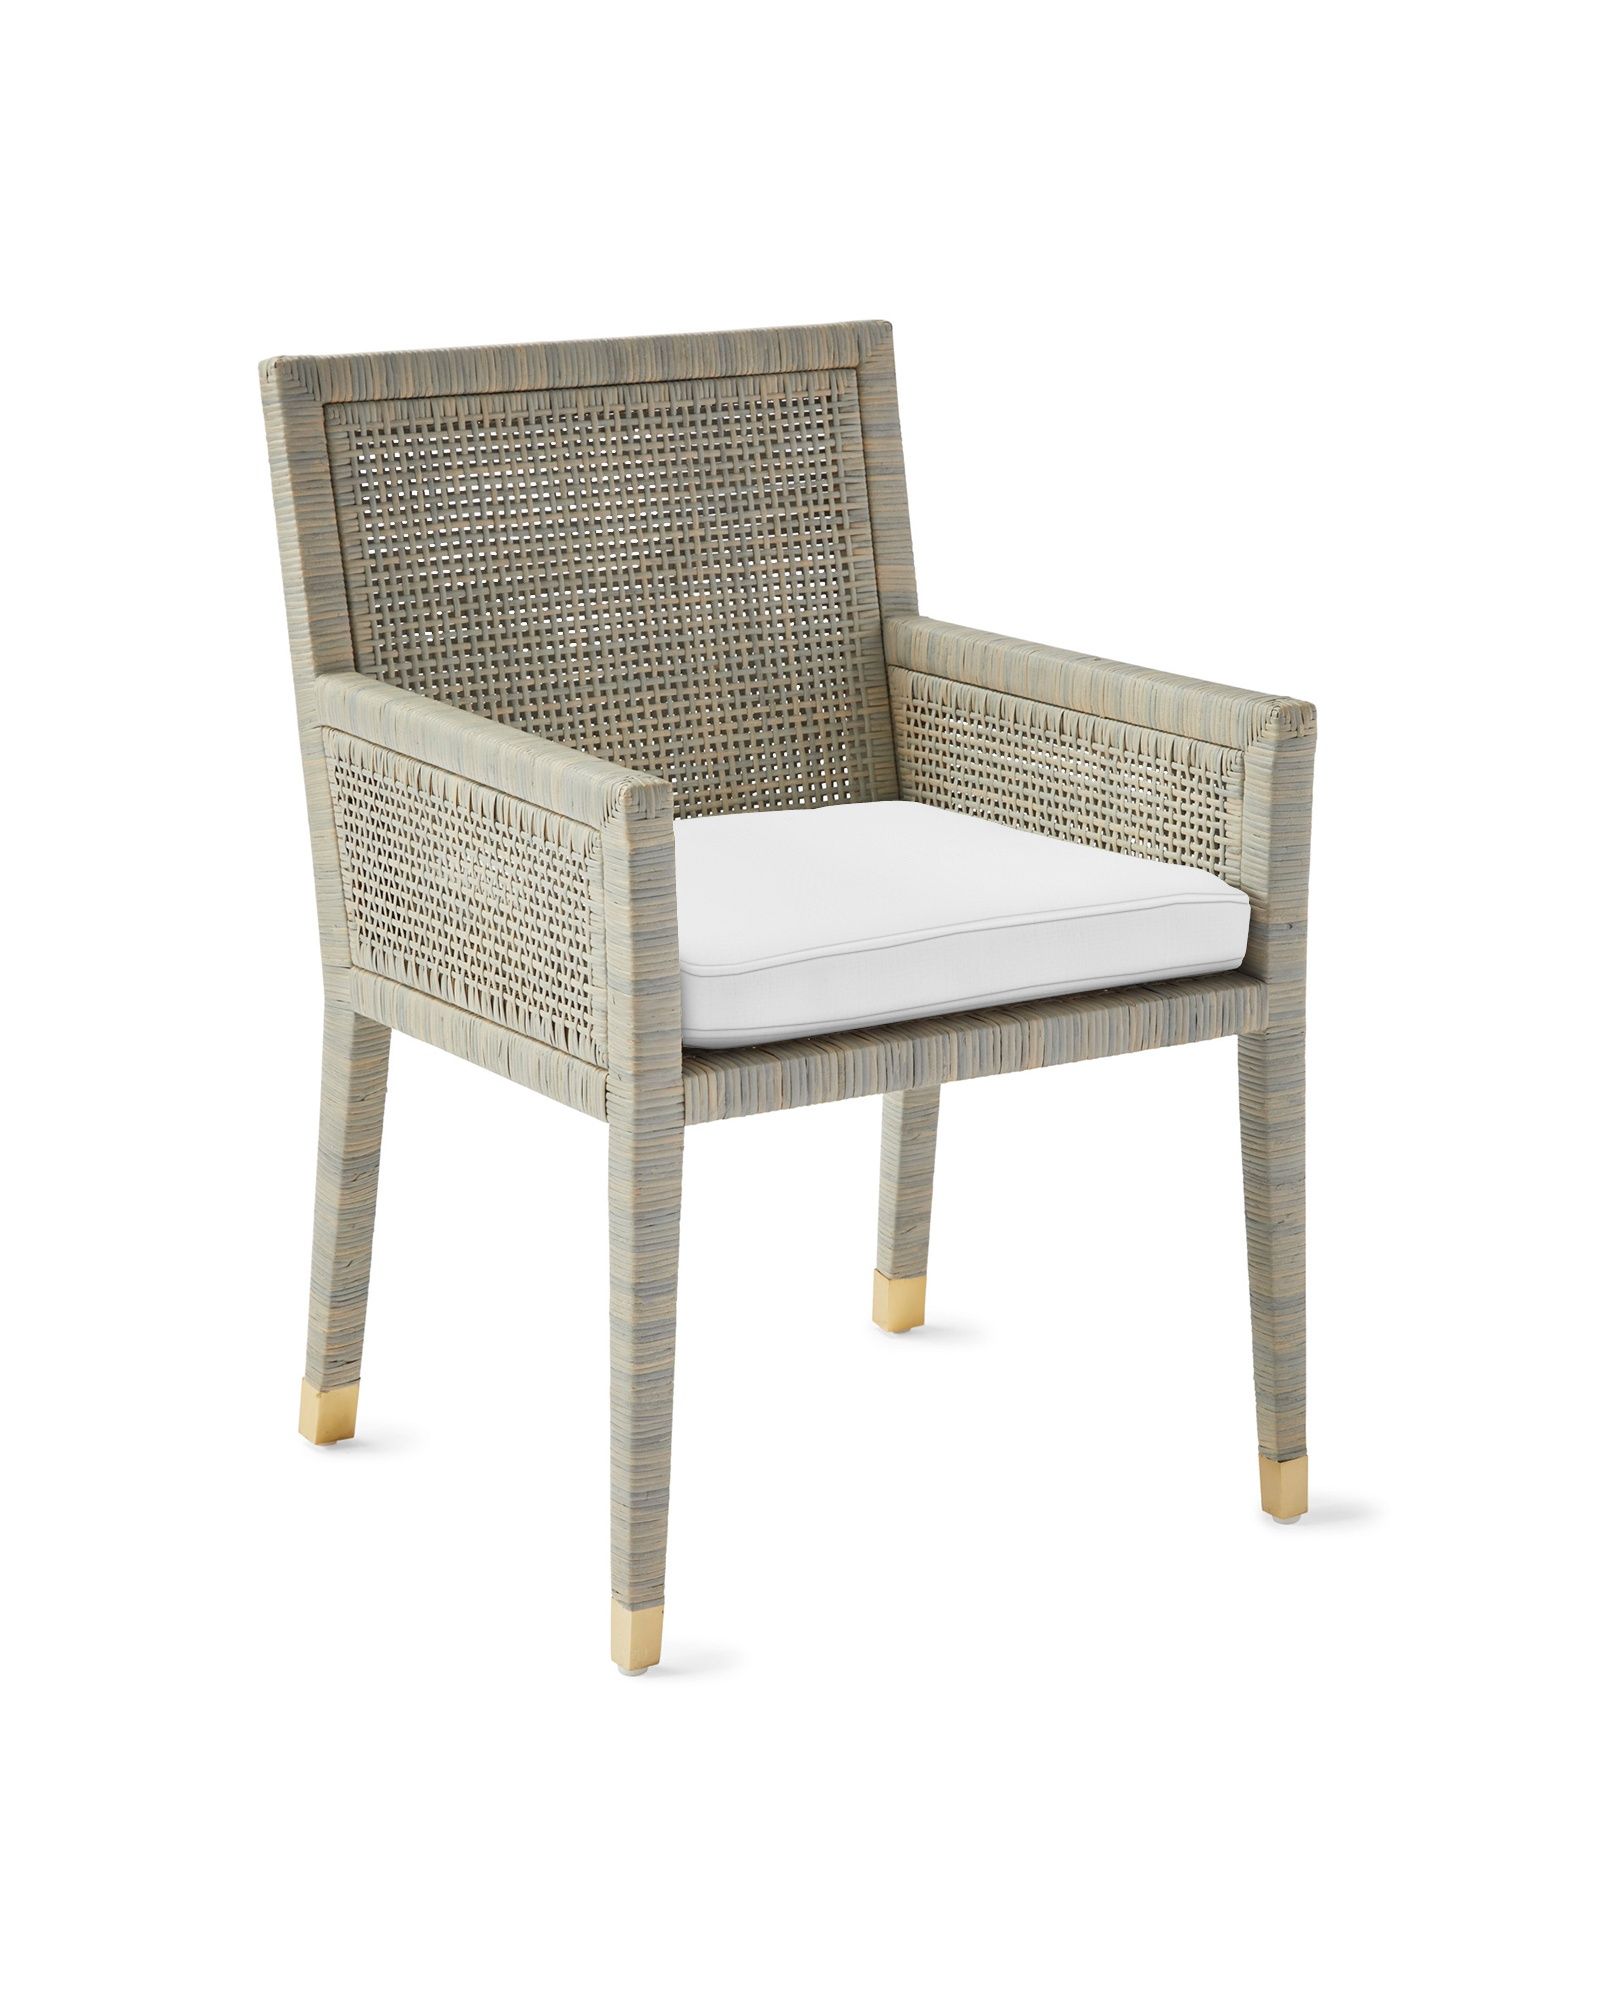 Balboa Armchair - Mist | Serena and Lily